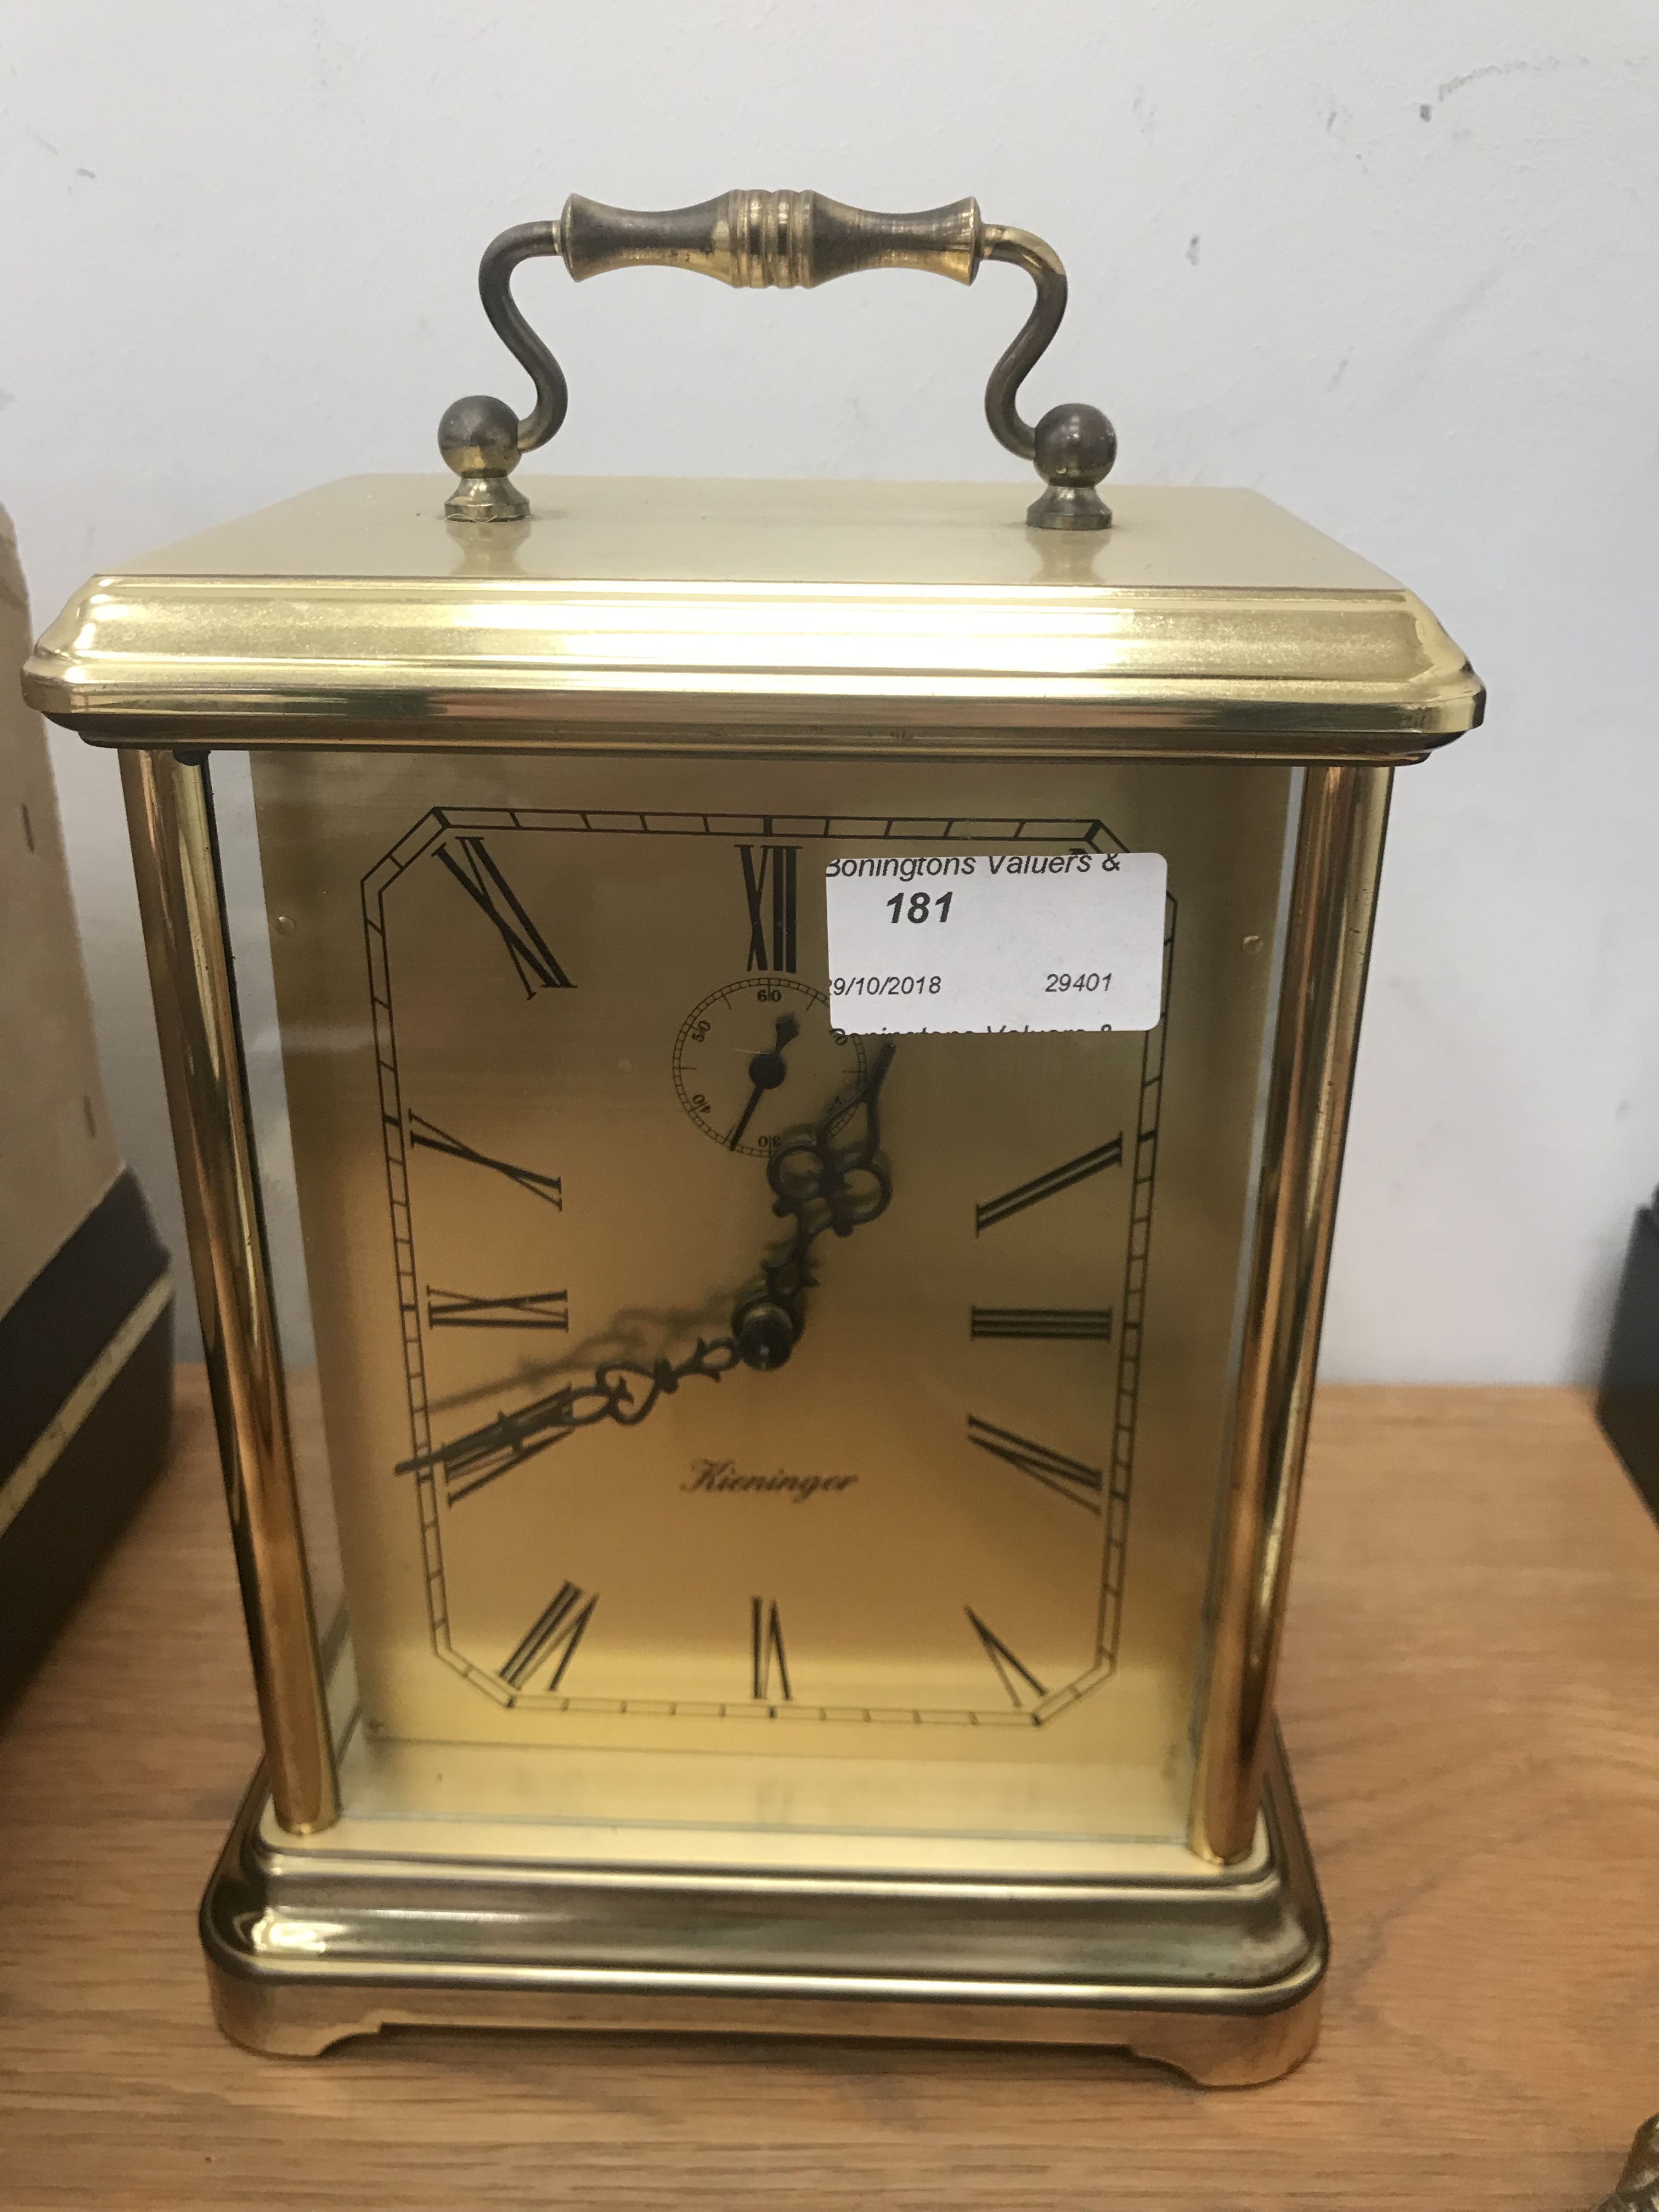 A large Kieninger four-chime mantel carriage clock